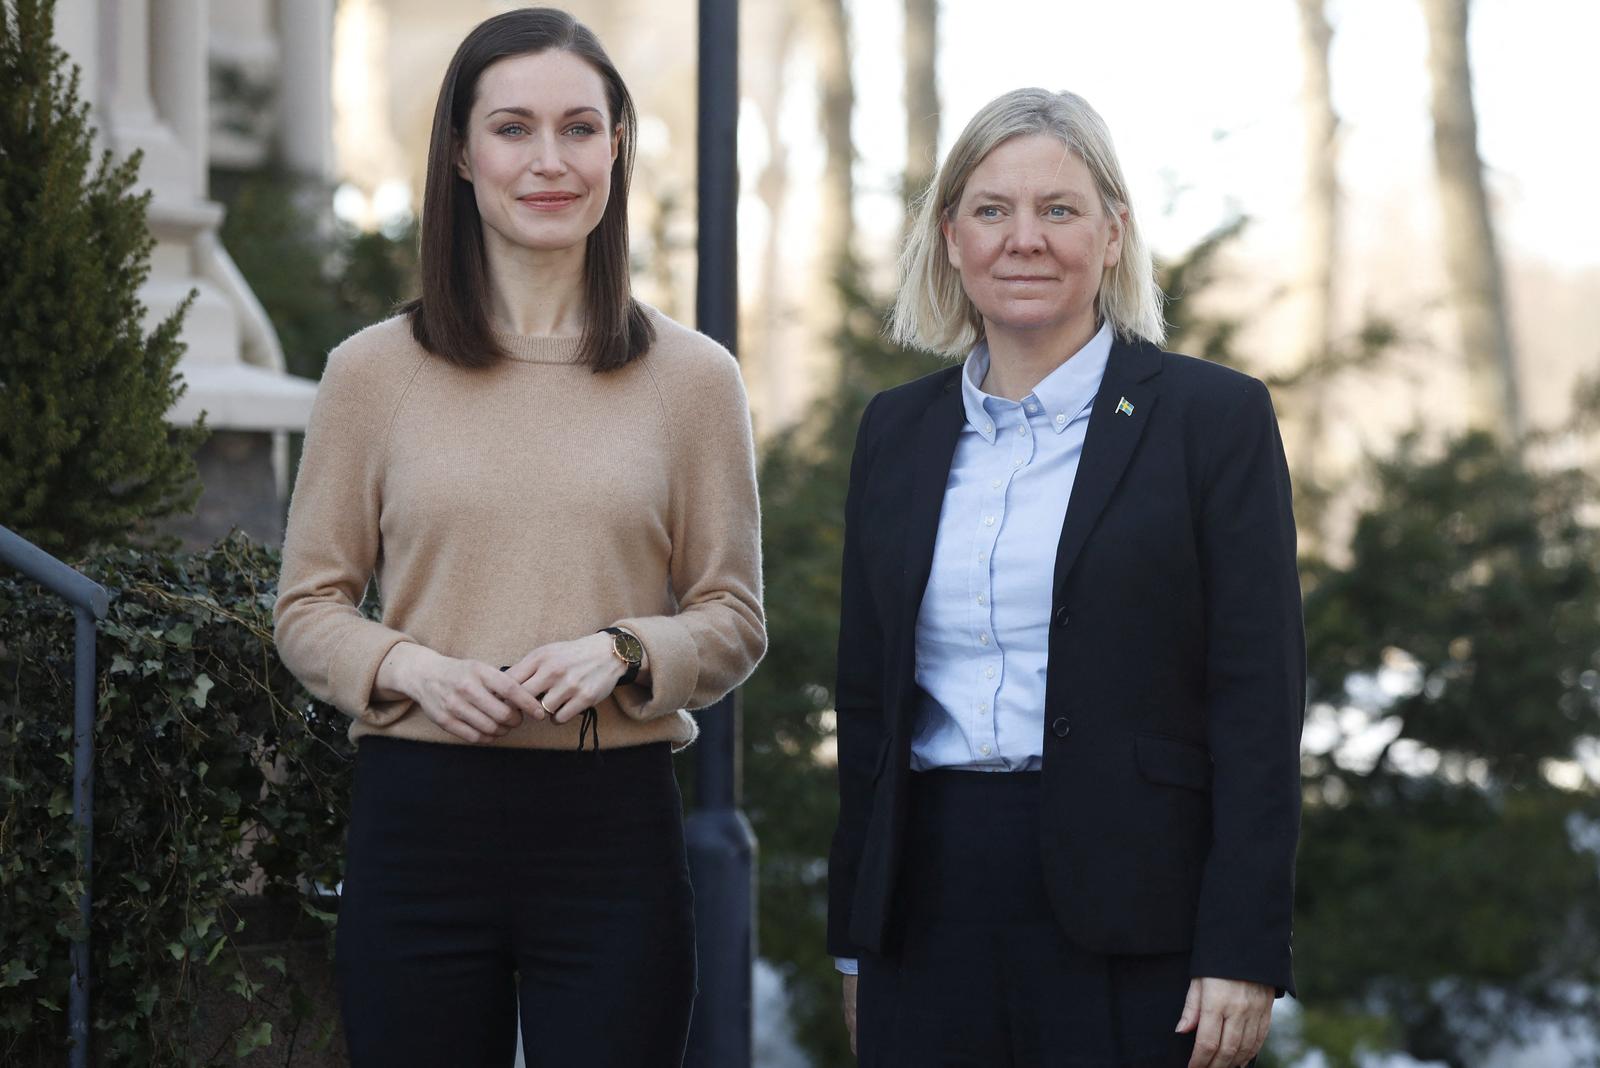 Finland's Prime Minister Sanna Marin welcomes her Swedish counterpart Magdalena Andersson at the Prime Minister's official residence, Kesaranta in Helsinki, Finland March 5, 2022. Roni Rekomaa/Lehtikuva/via REUTERS  ATTENTION EDITORS - THIS IMAGE WAS PROVIDED BY A THIRD PARTY. NO THIRD PARTY SALES. NOT FOR USE BY REUTERS THIRD PARTY DISTRIBUTORS. FINLAND OUT. NO COMMERCIAL OR EDITORIAL SALES IN FINLAND. Photo: LEHTIKUVA/REUTERS